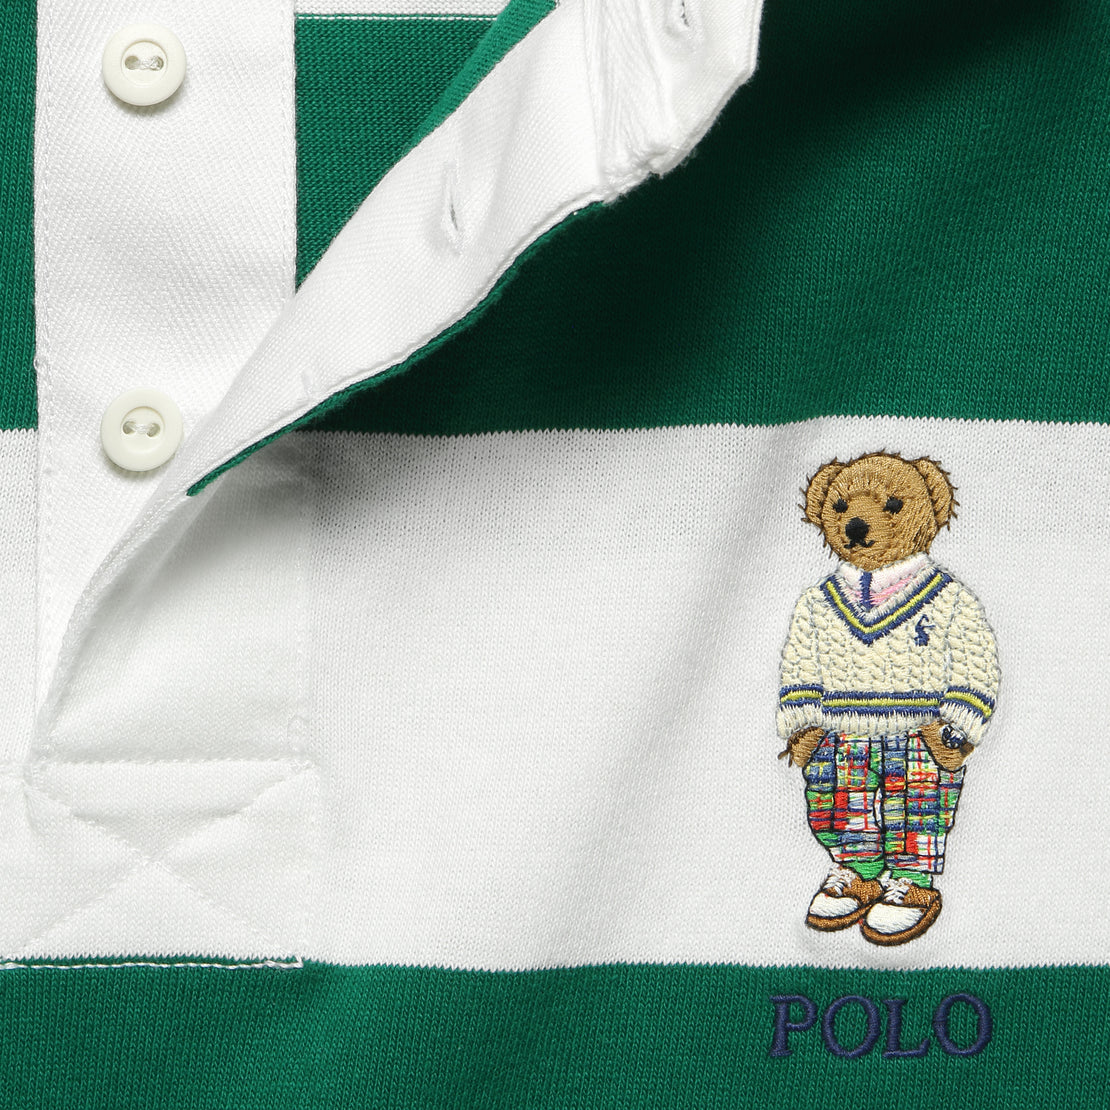 Preppy Bear Rugby Shirt - Green/White Stripe - Polo Ralph Lauren - STAG Provisions - Tops - L/S Knit